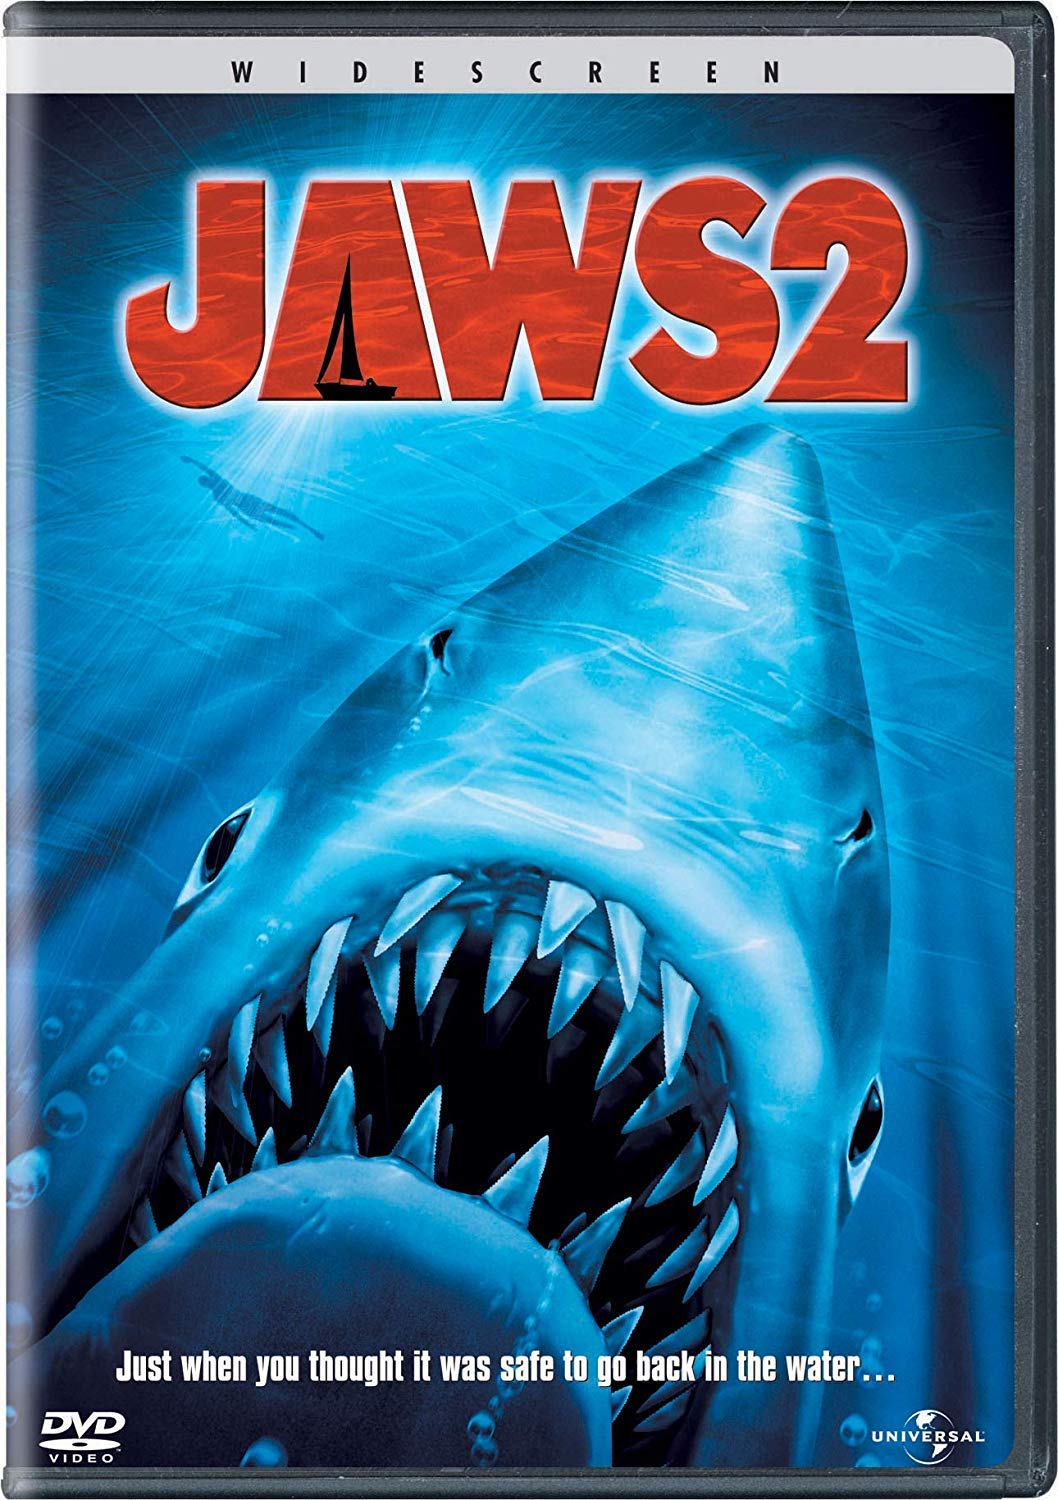 The Making of 'Jaws 2'